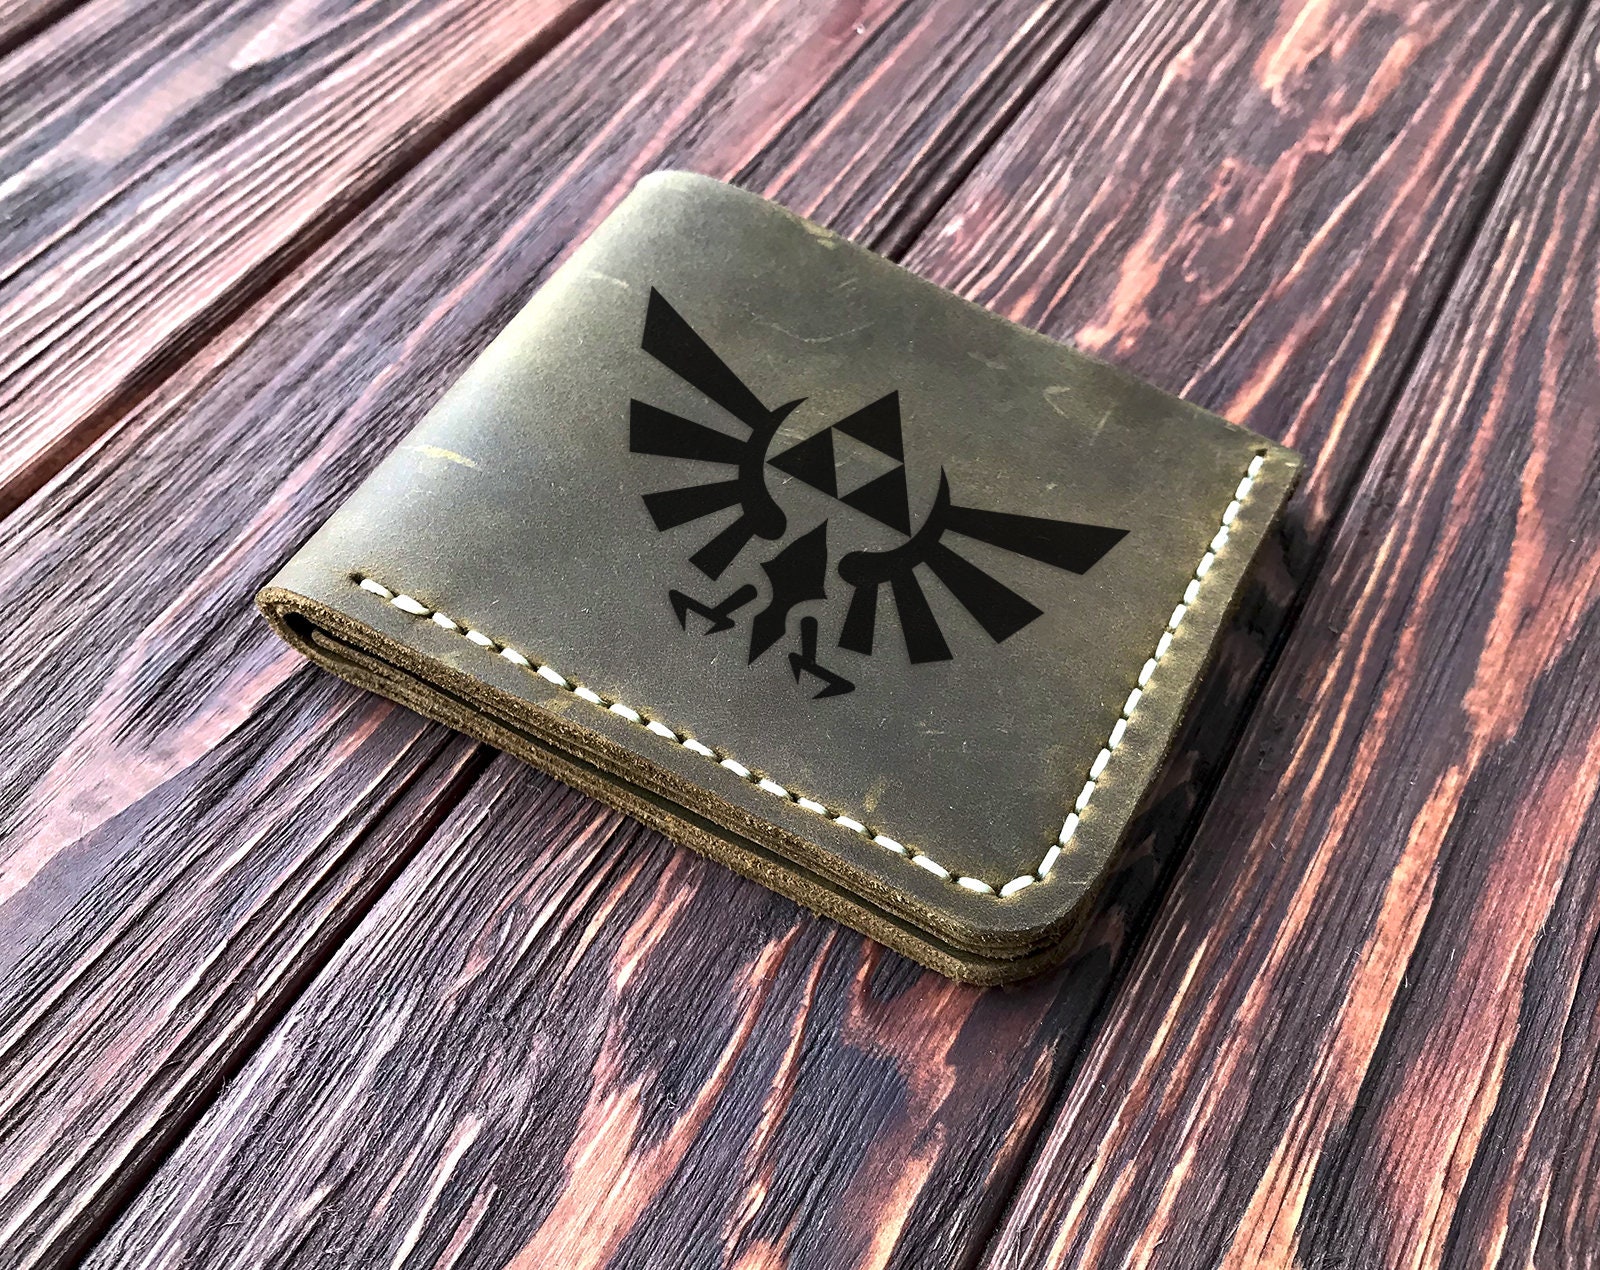  Men's 3D Genuine Leather Wallet, Hand-Carved, Hand-Painted,  Leather Carving, Custom wallet, Personalized wallet, Triforce and Holy  Relics, Legend of Zelda, Ocarina of Time Spiritual Stones : Handmade  Products